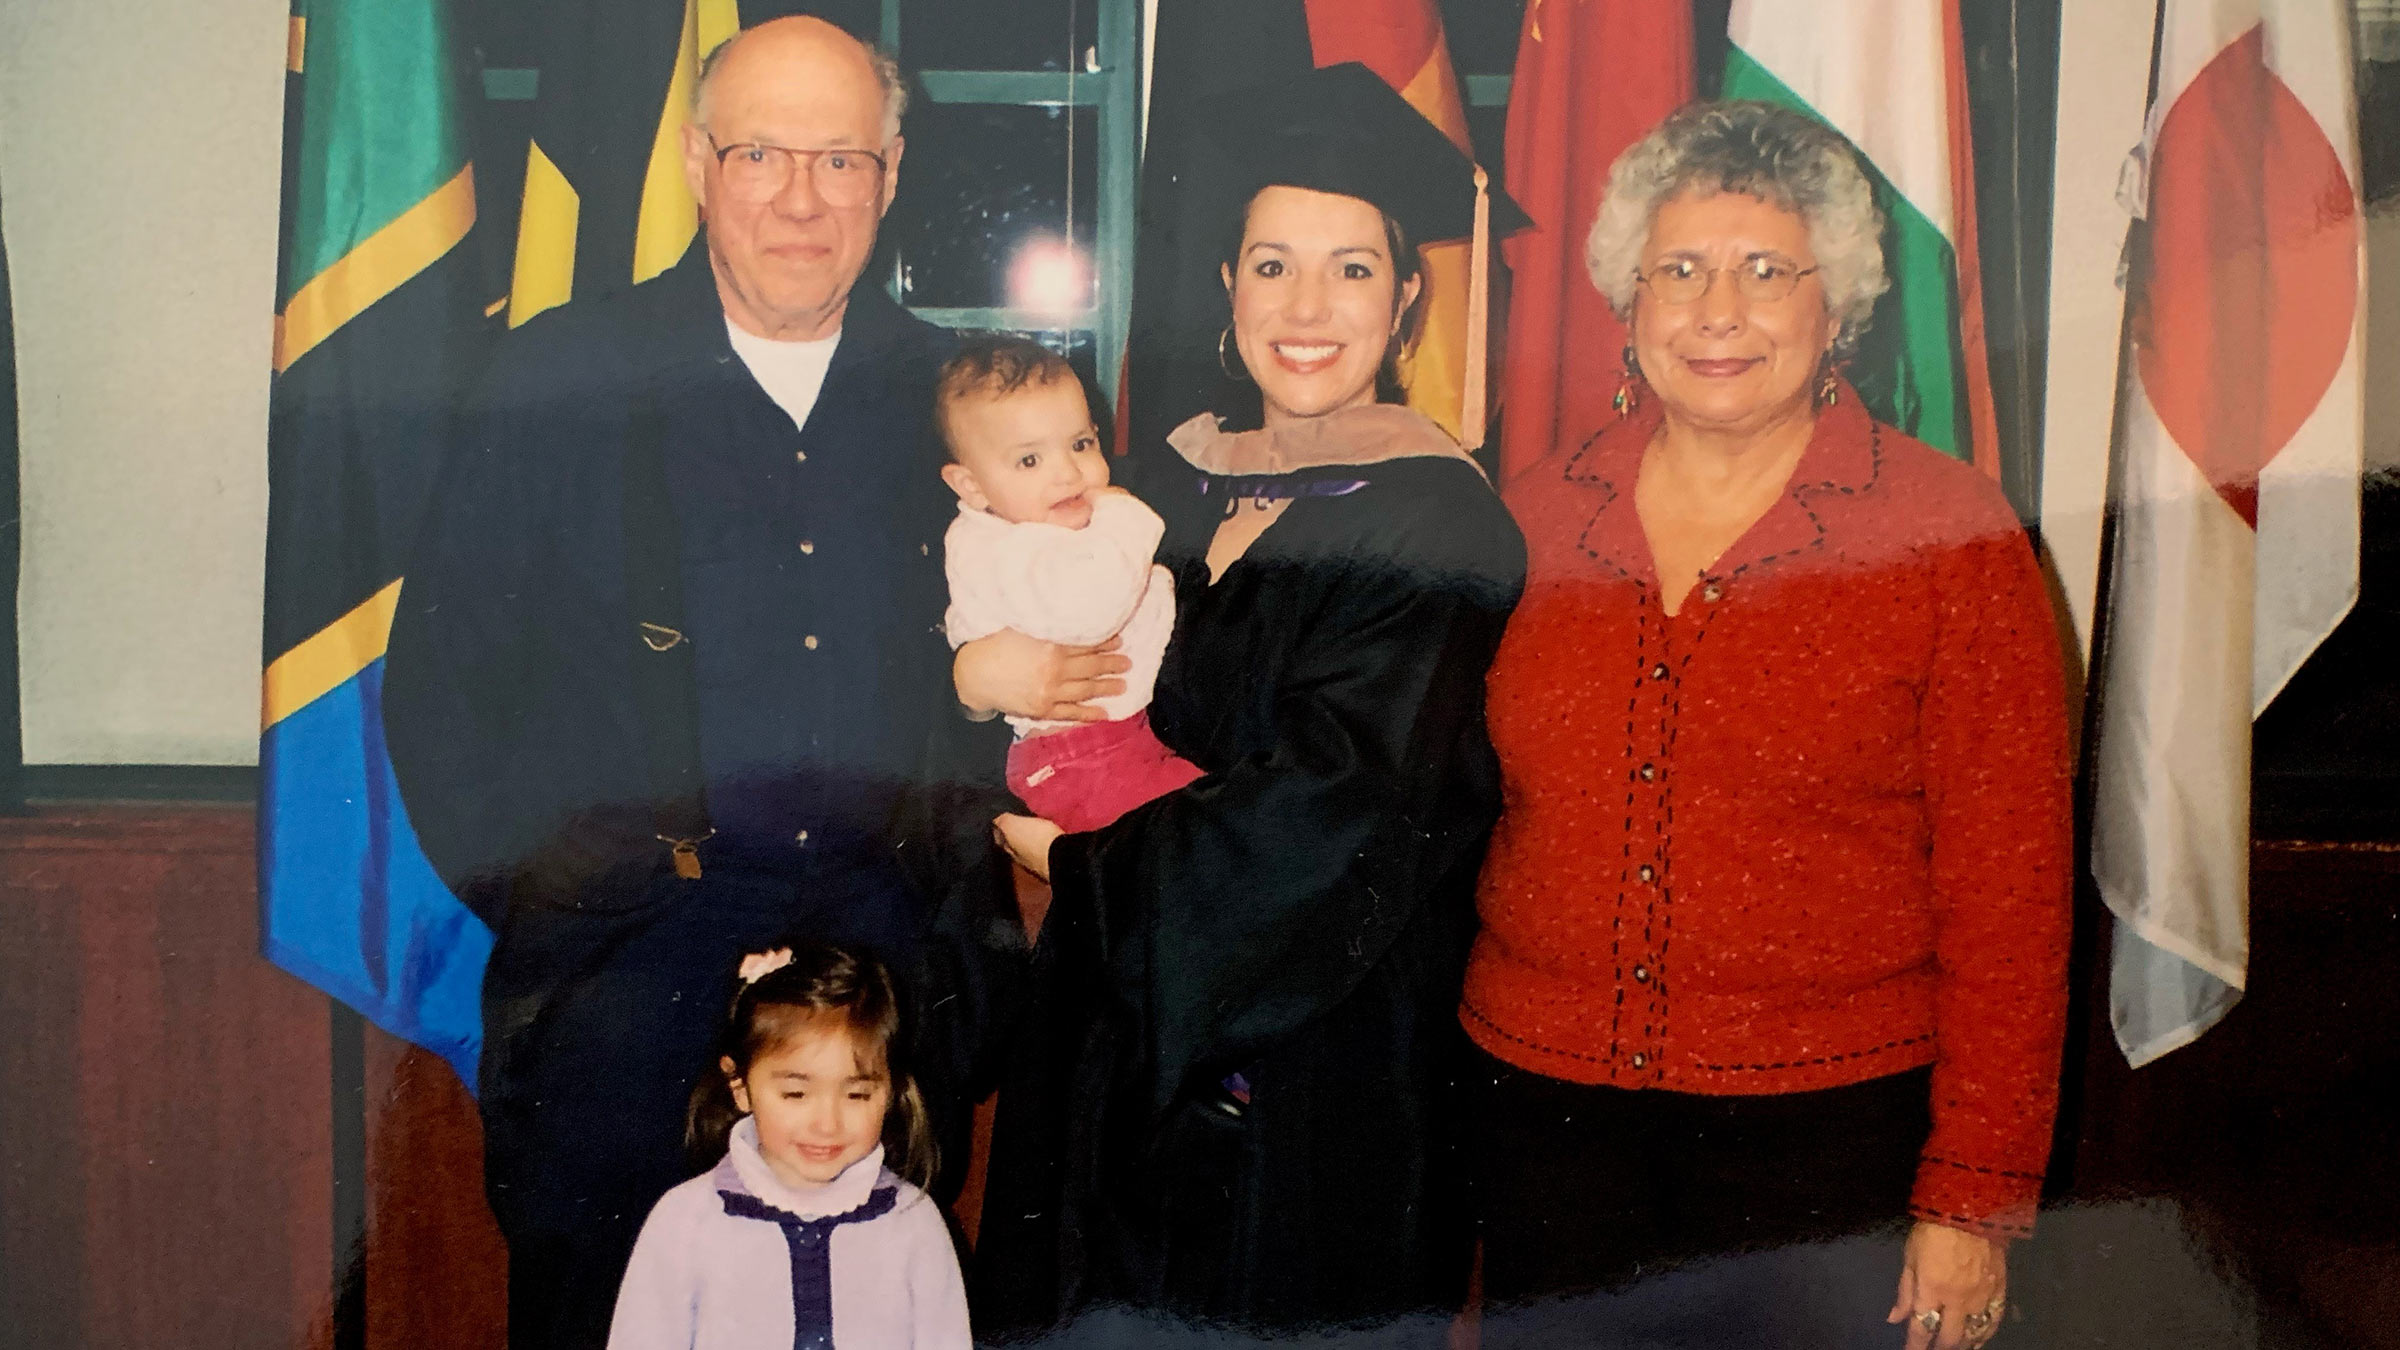 Amy’s graduation from the University of St. Thomas in fall 2004. Pictured are Joel and Carolina, Amy’s parents, and two of Amy’s children, Carmen (top center) and Sophia (bottom left).